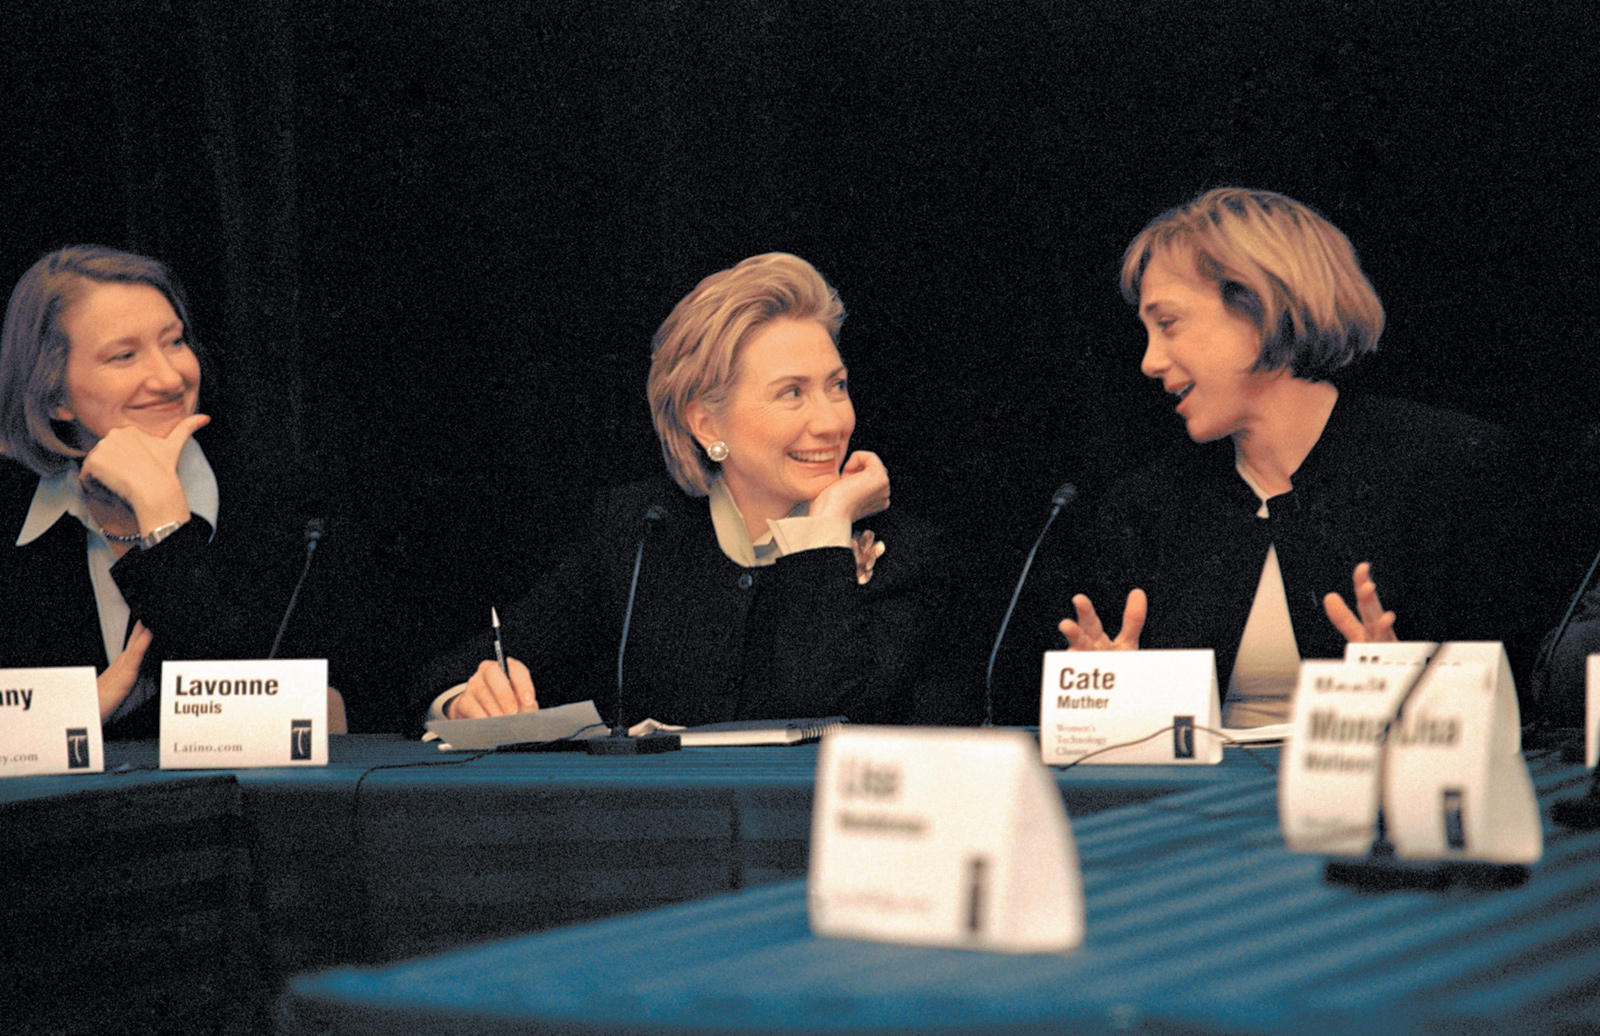 Hillary Clinton at a roundtable discussion about women and technology, San Francisco, March 2000. At left is Lavonne Luquis, cofounder of the Internet start-up Latino.com; at right is Cate Muther, founder of the Women’s Technology Cluster (now called Astia), an incubator for female entrepreneurs in the high-tech industry.